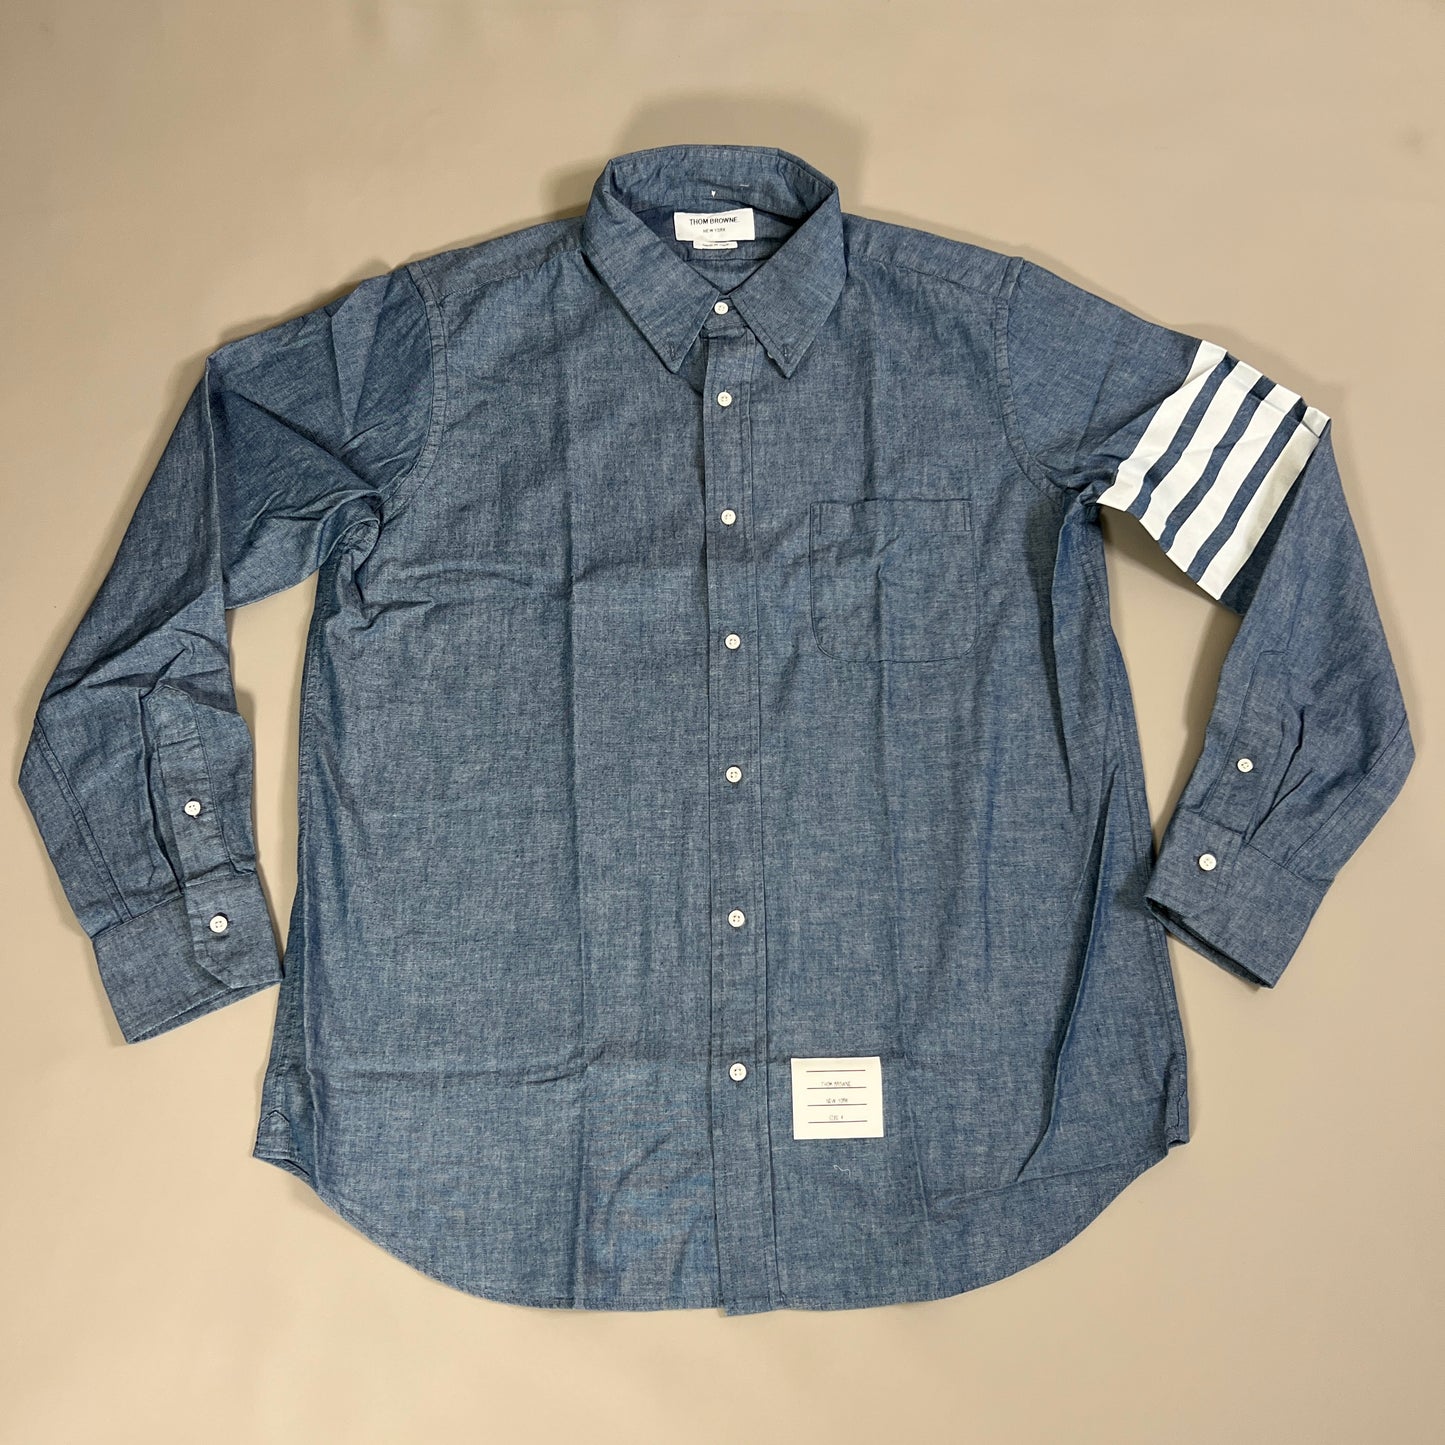 THOM BROWNE Straight Fit Button-Down Long Sleeve Shirt w/printed 4 Bar Sleeve in Chambray Blue Size 4 (NEW)